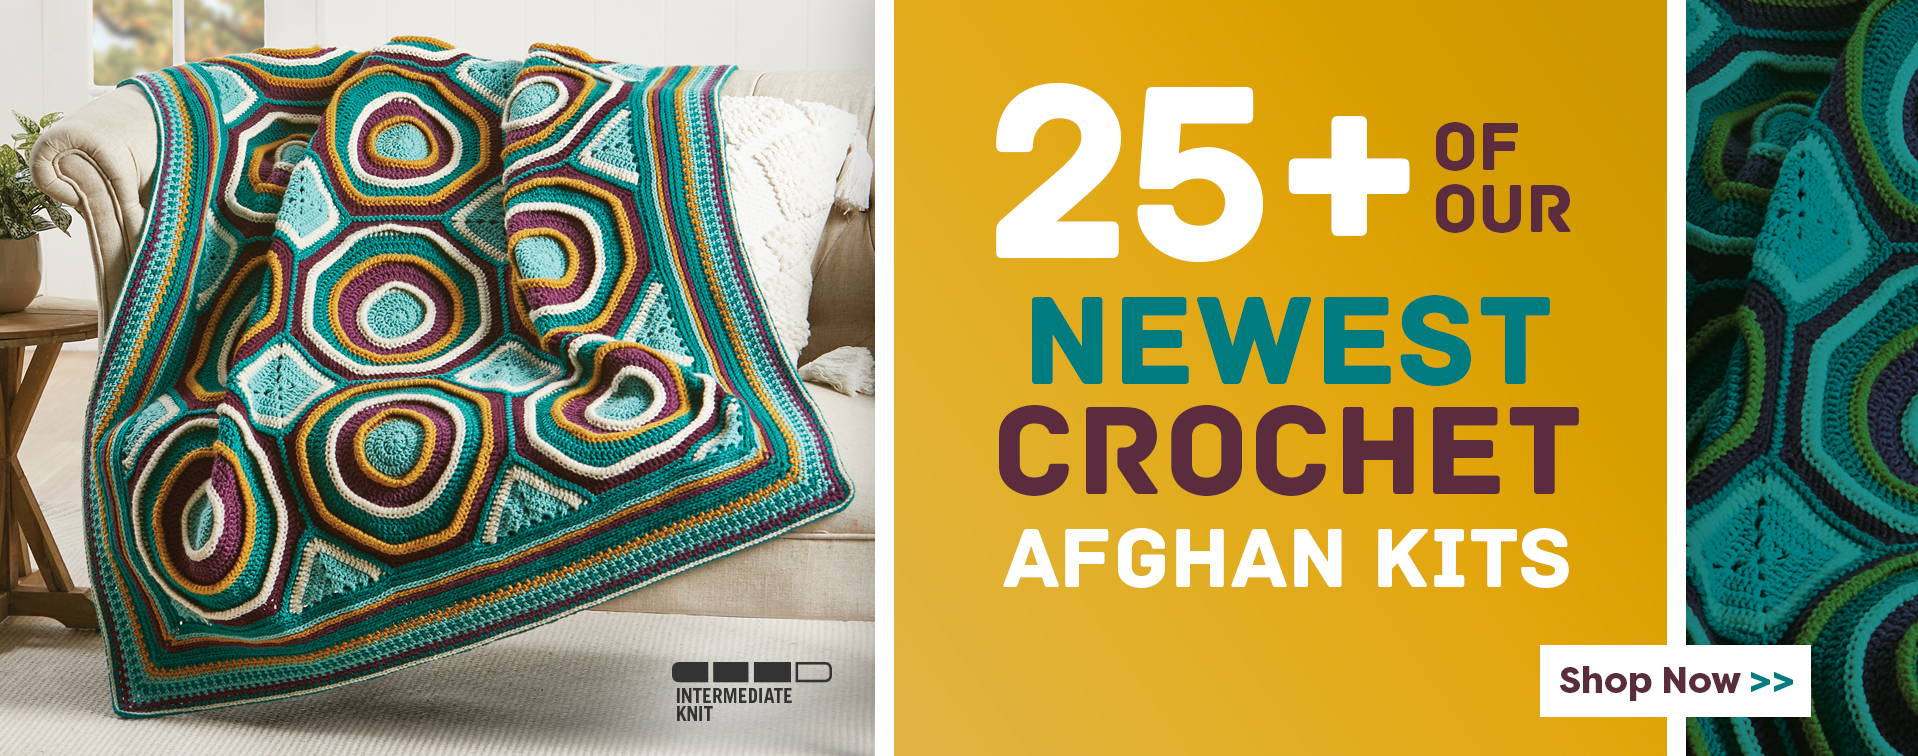 25 plus of our Newest Crochet Afghan Kits